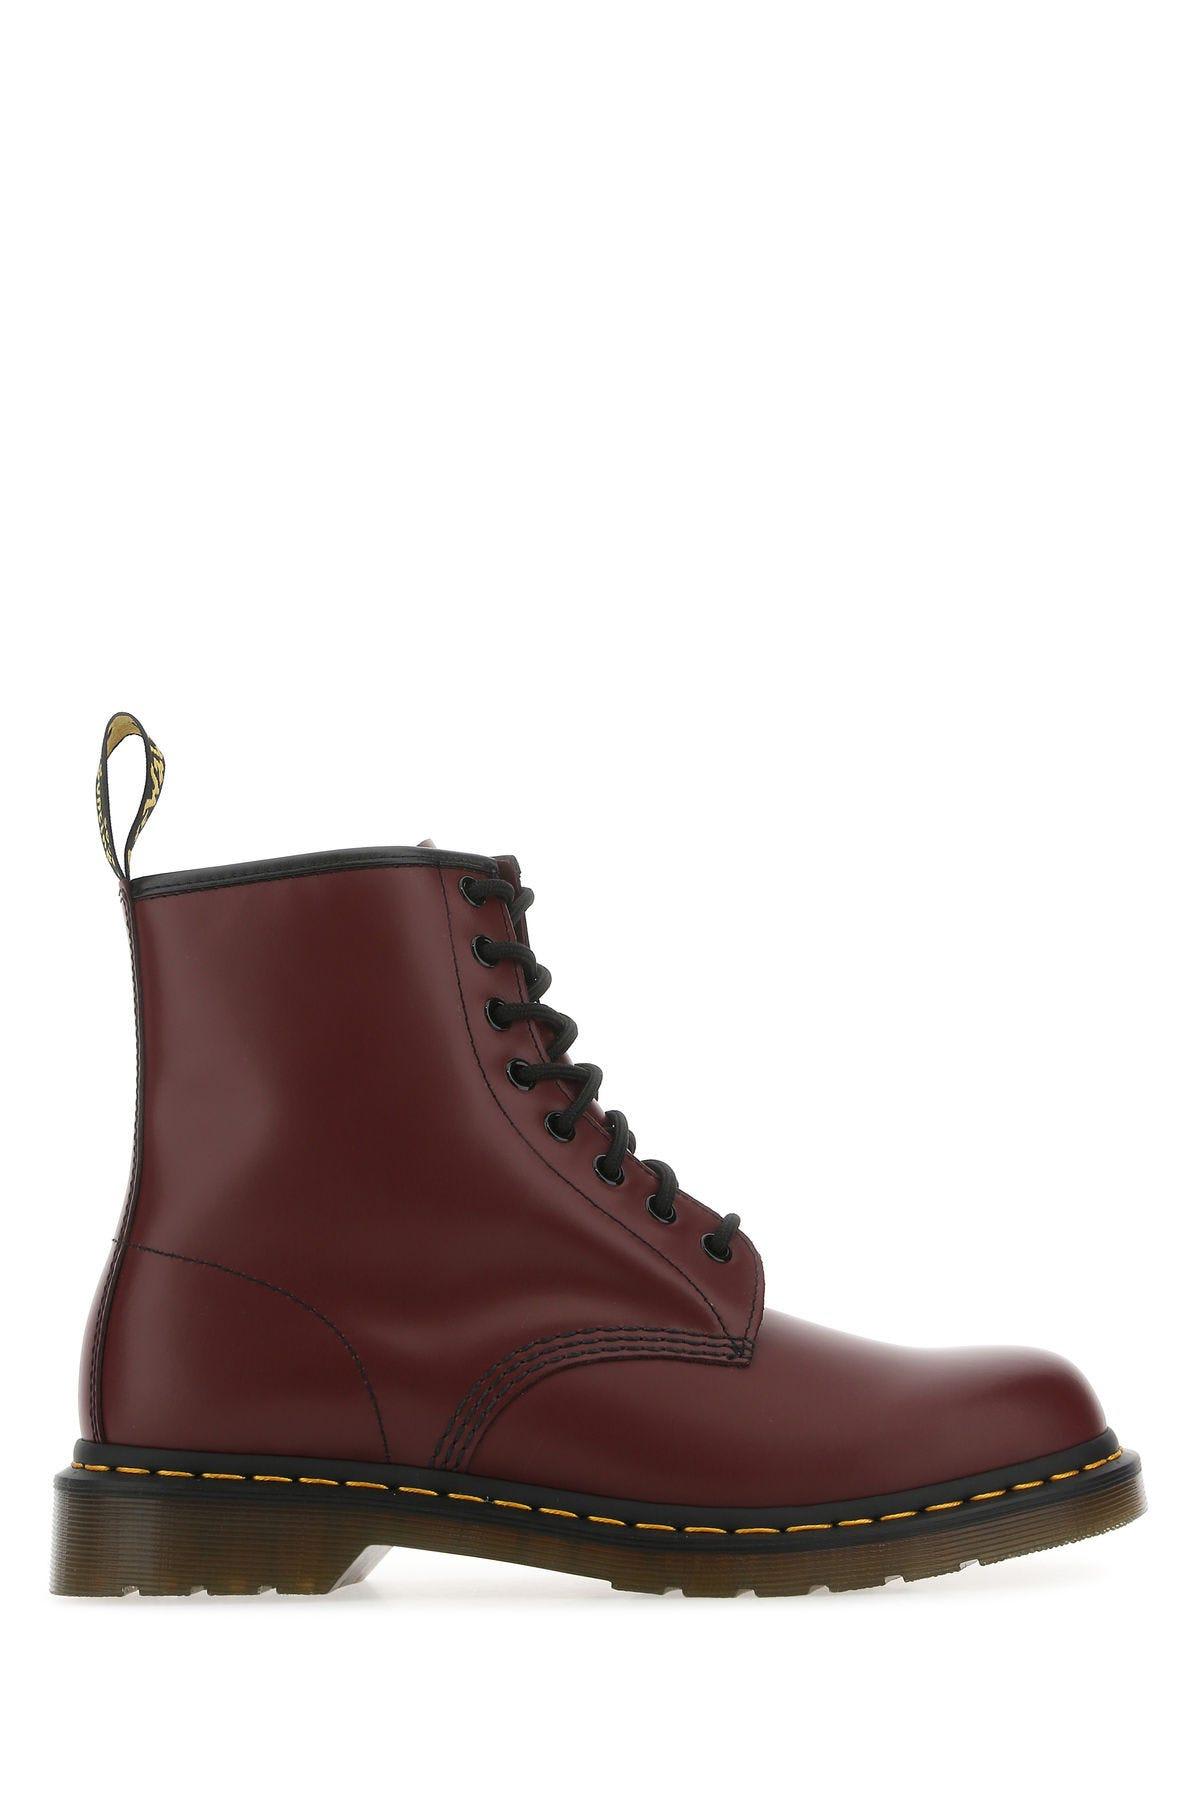 DR. MARTENS' BURGUNDY LEATHER 1460 ANKLE BOOTS